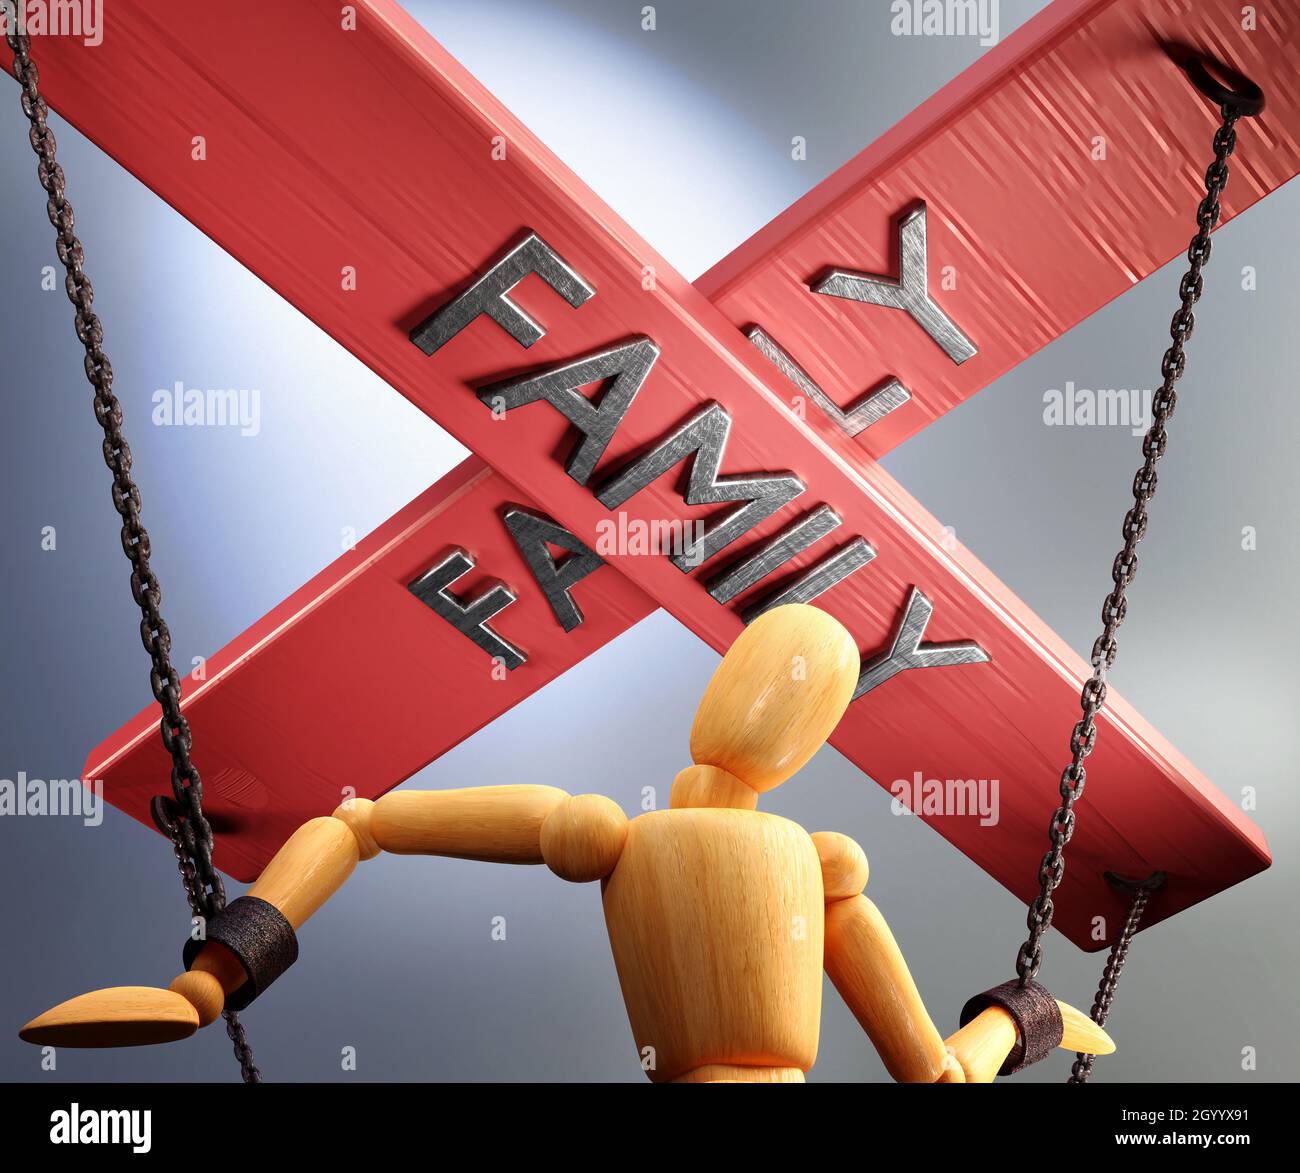 Family control, power, authority and manipulation symbolized by control bar with word Family pulling the strings (chains) of a wooden puppet, 3d illus Stock Photo